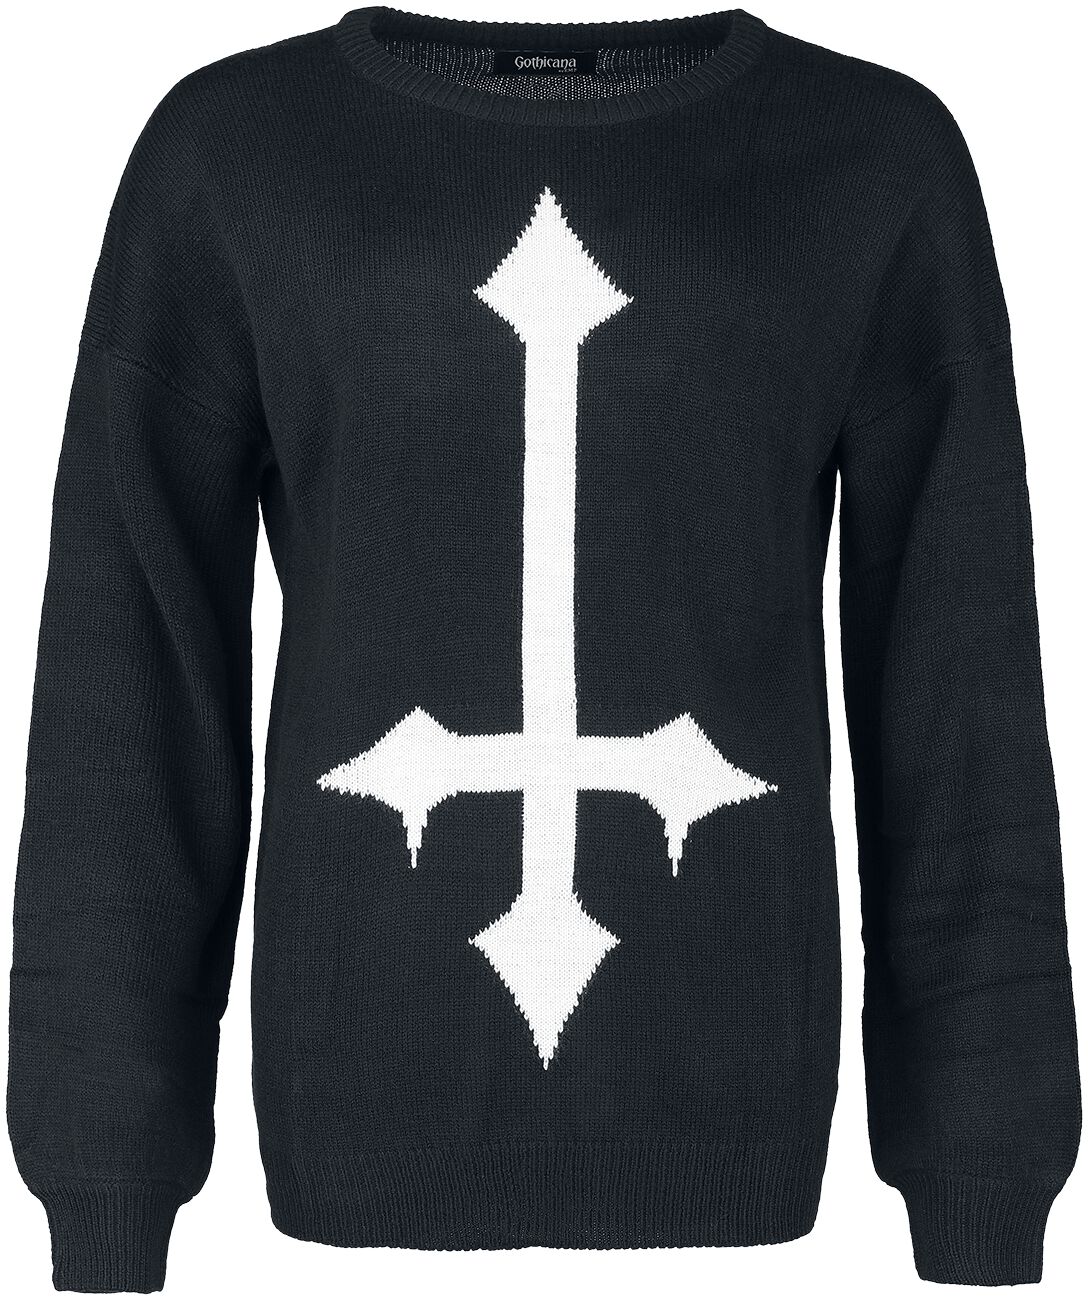 Black Blood by Gothicana Knitted sweater with large cross Knit jumper black